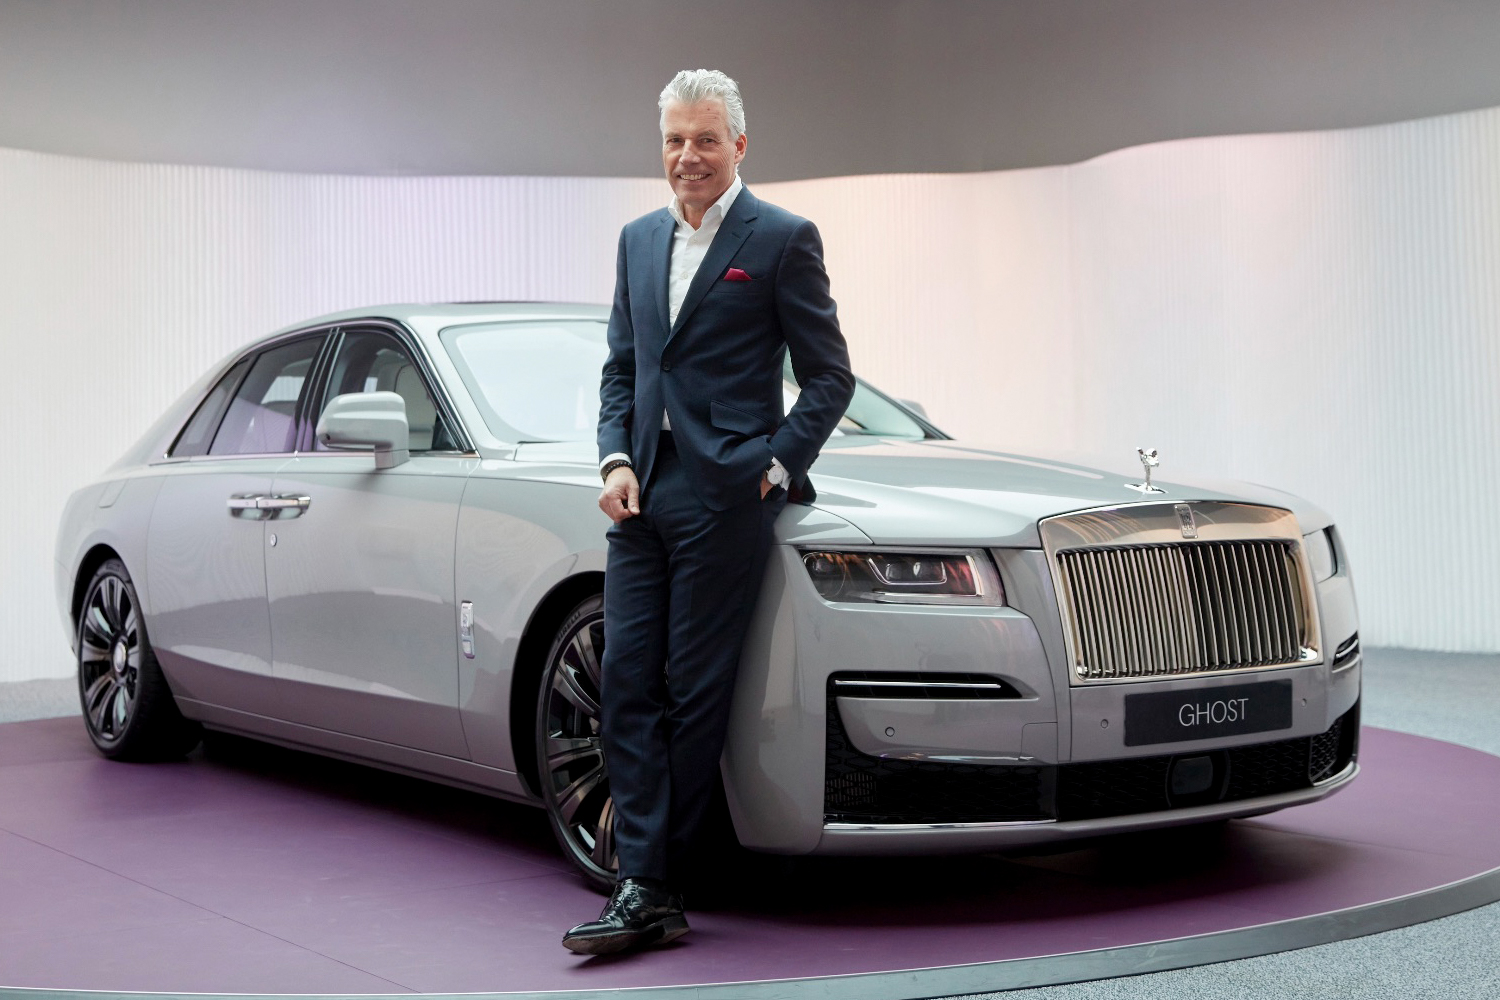 Finally, a Rolls-Royce Phantom for the rich and famous